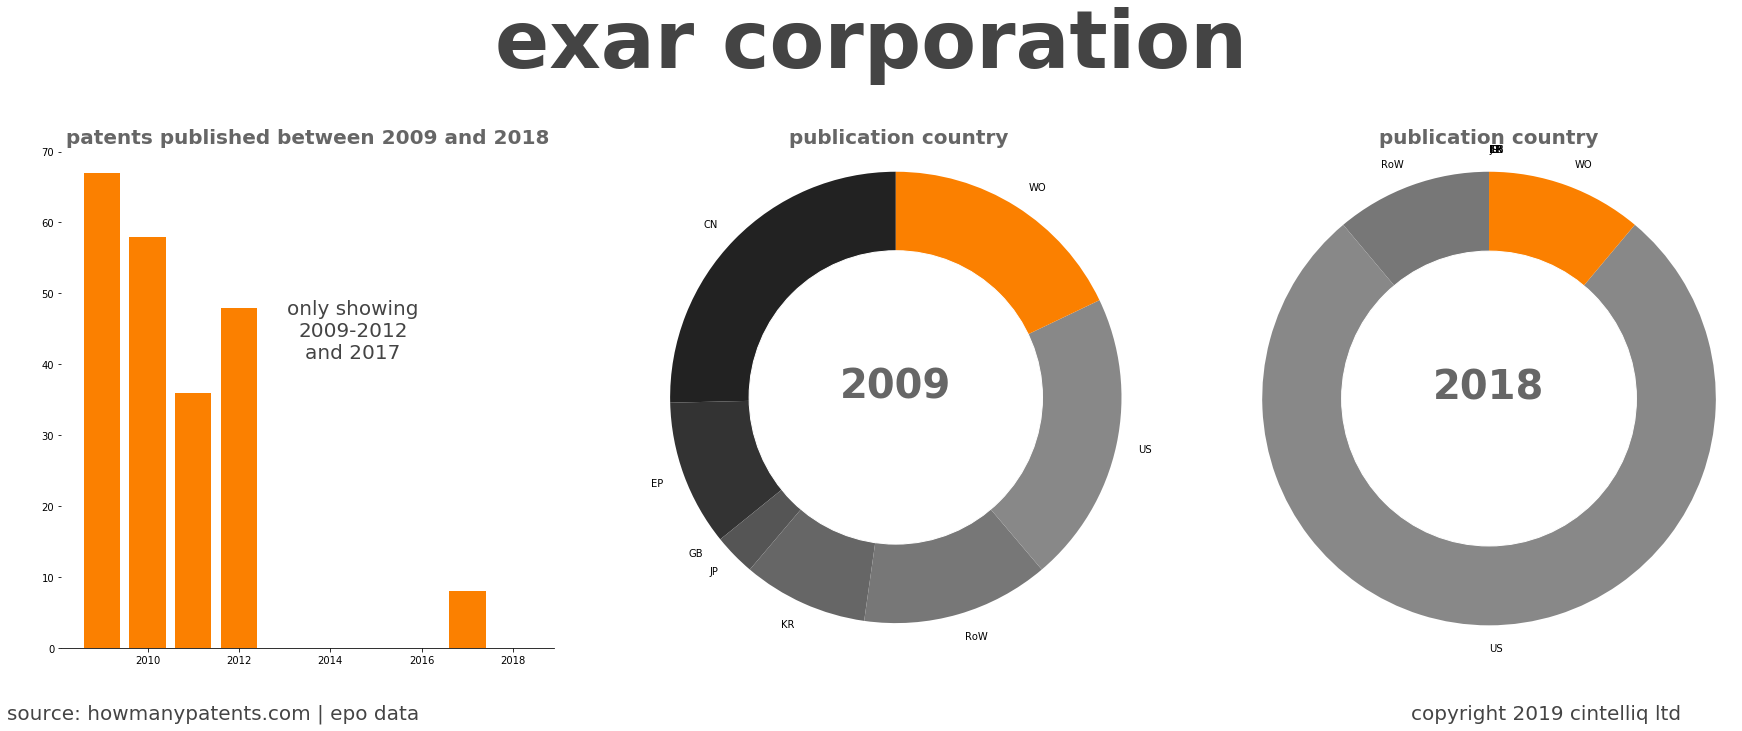 summary of patents for Exar Corporation